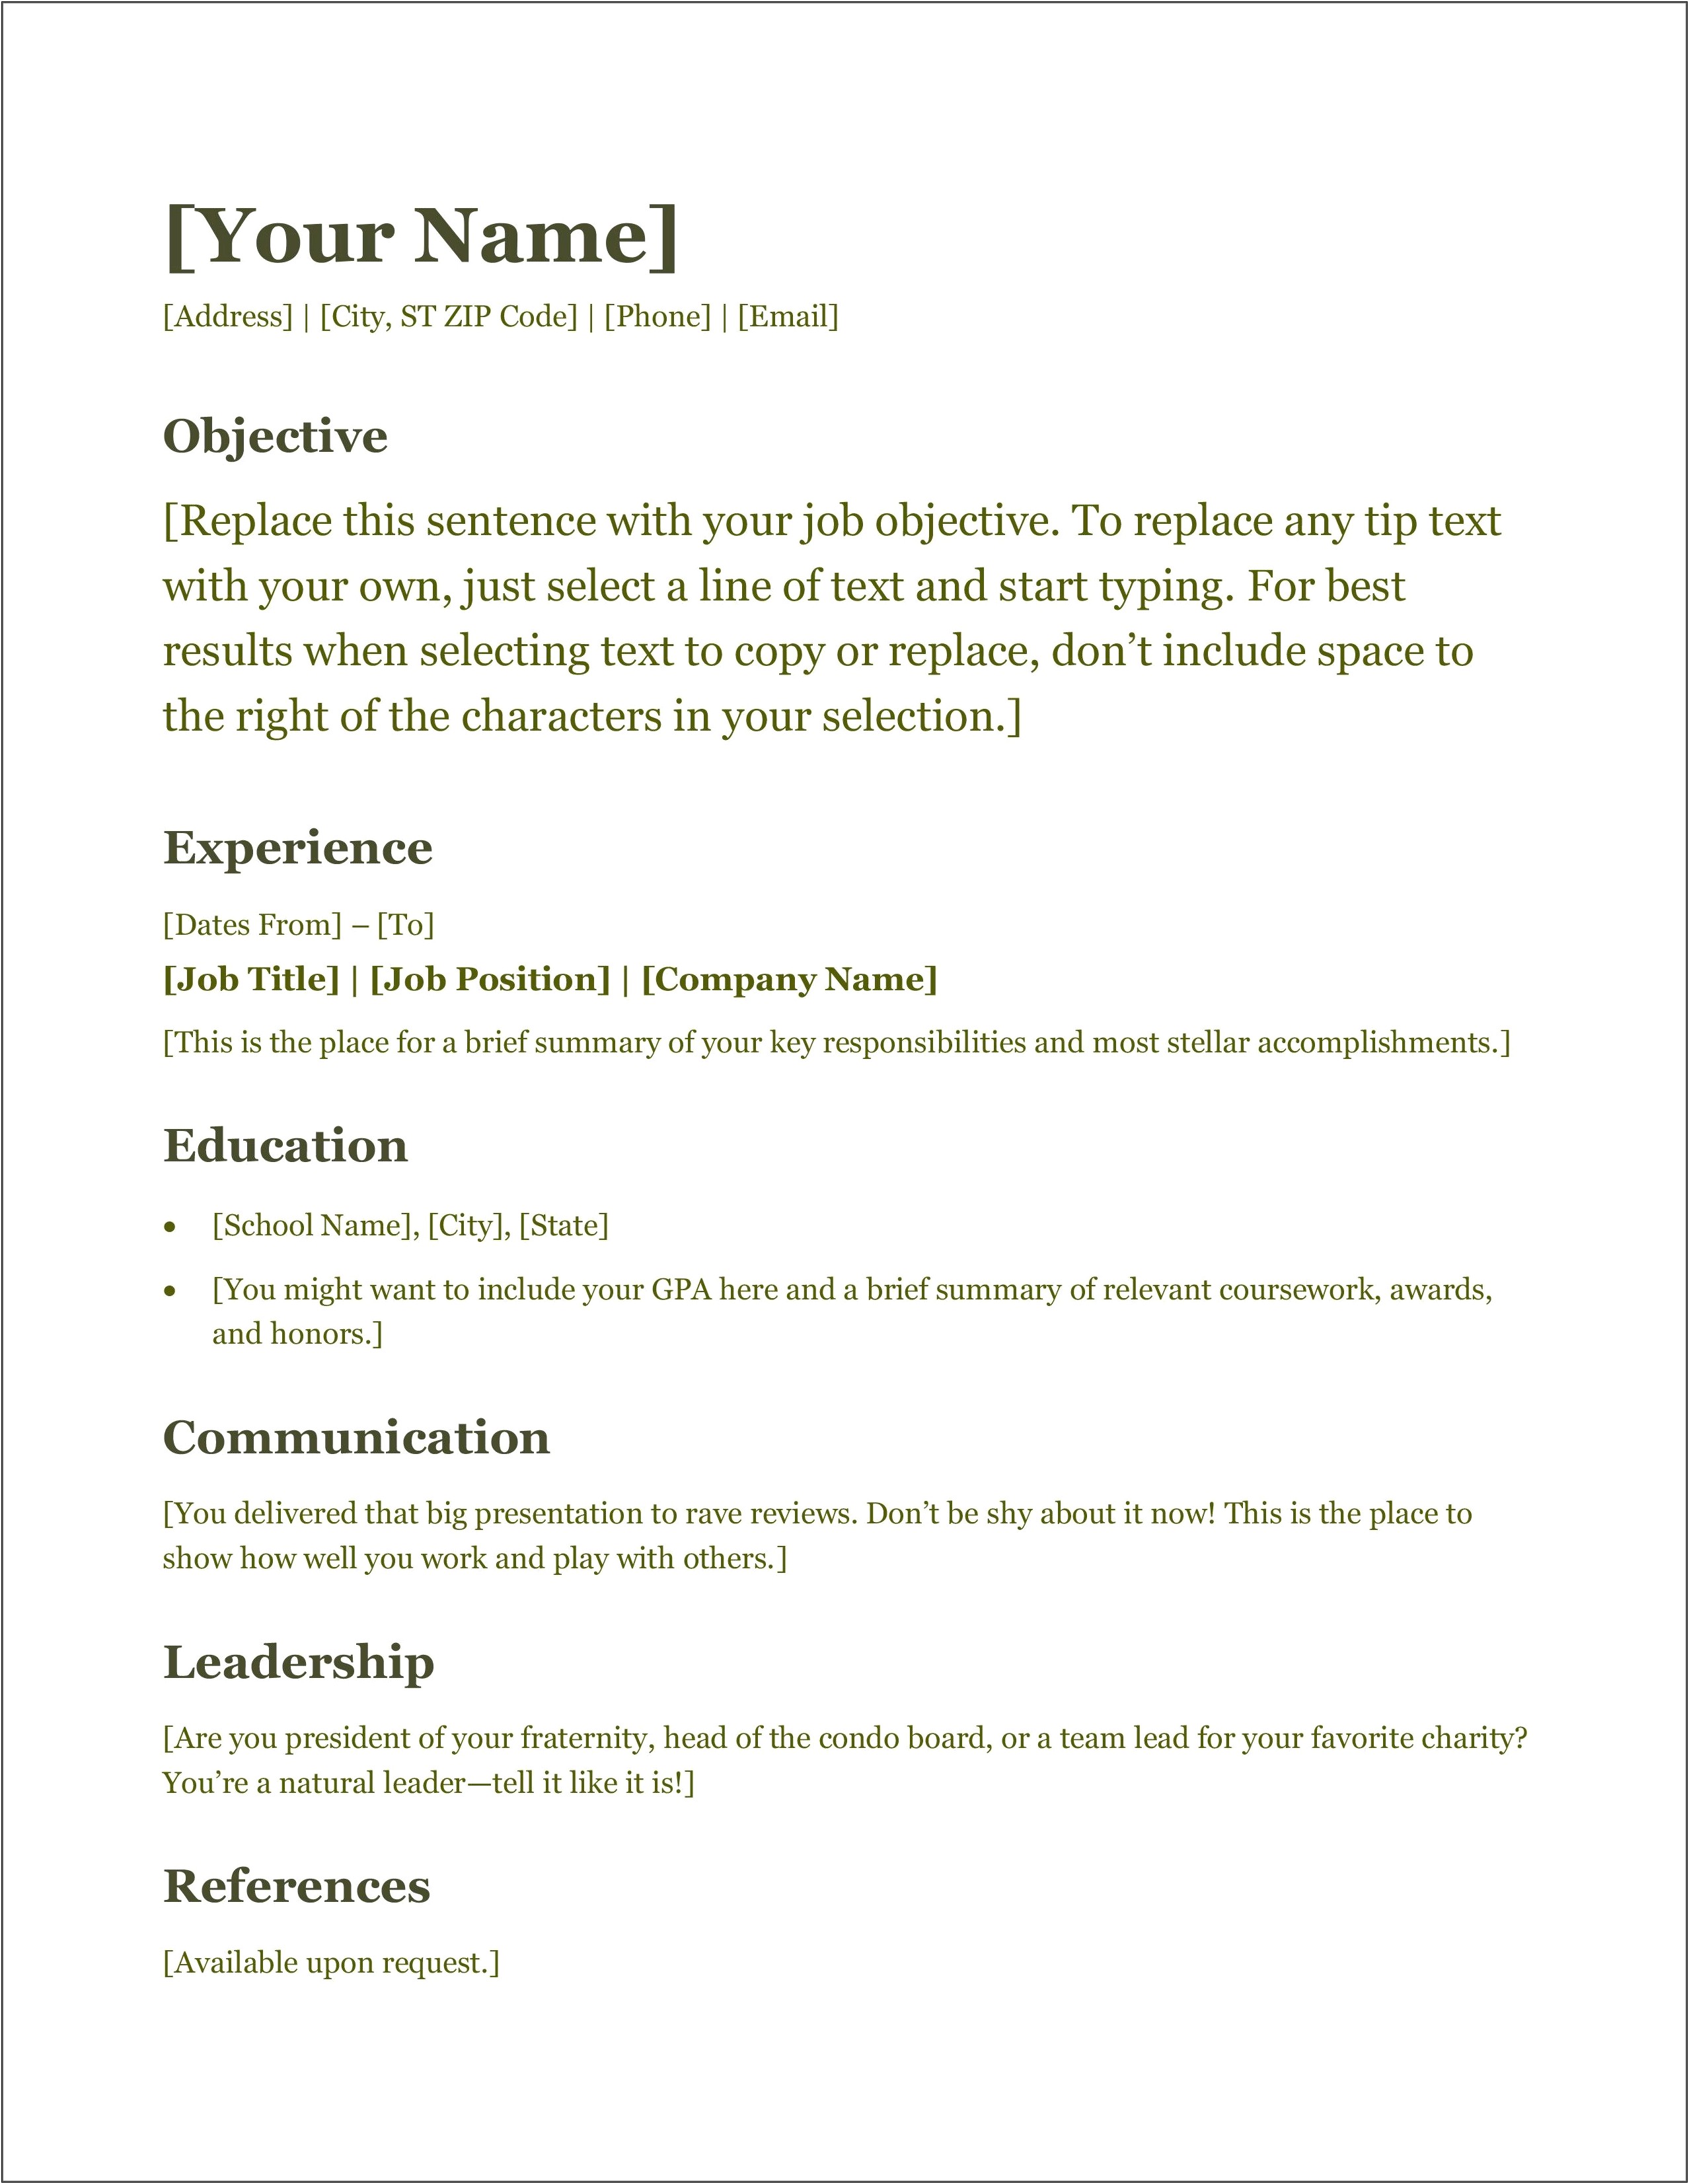 Microsoft Office Word Resume Templates Free Download